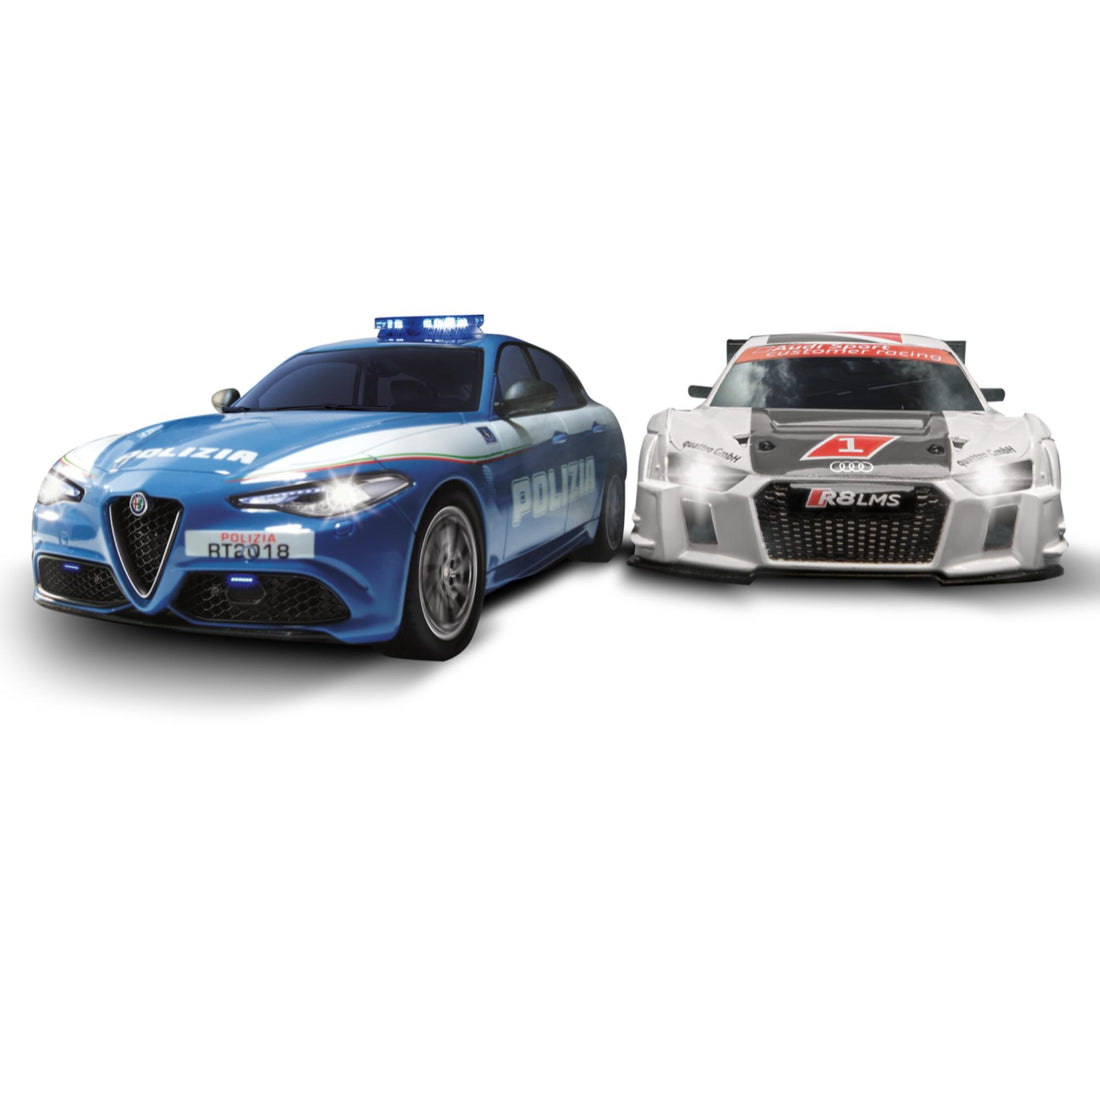 POLIZIA TRACK electric: 3m track length - 1:43 Scale cars with lights and turbo function